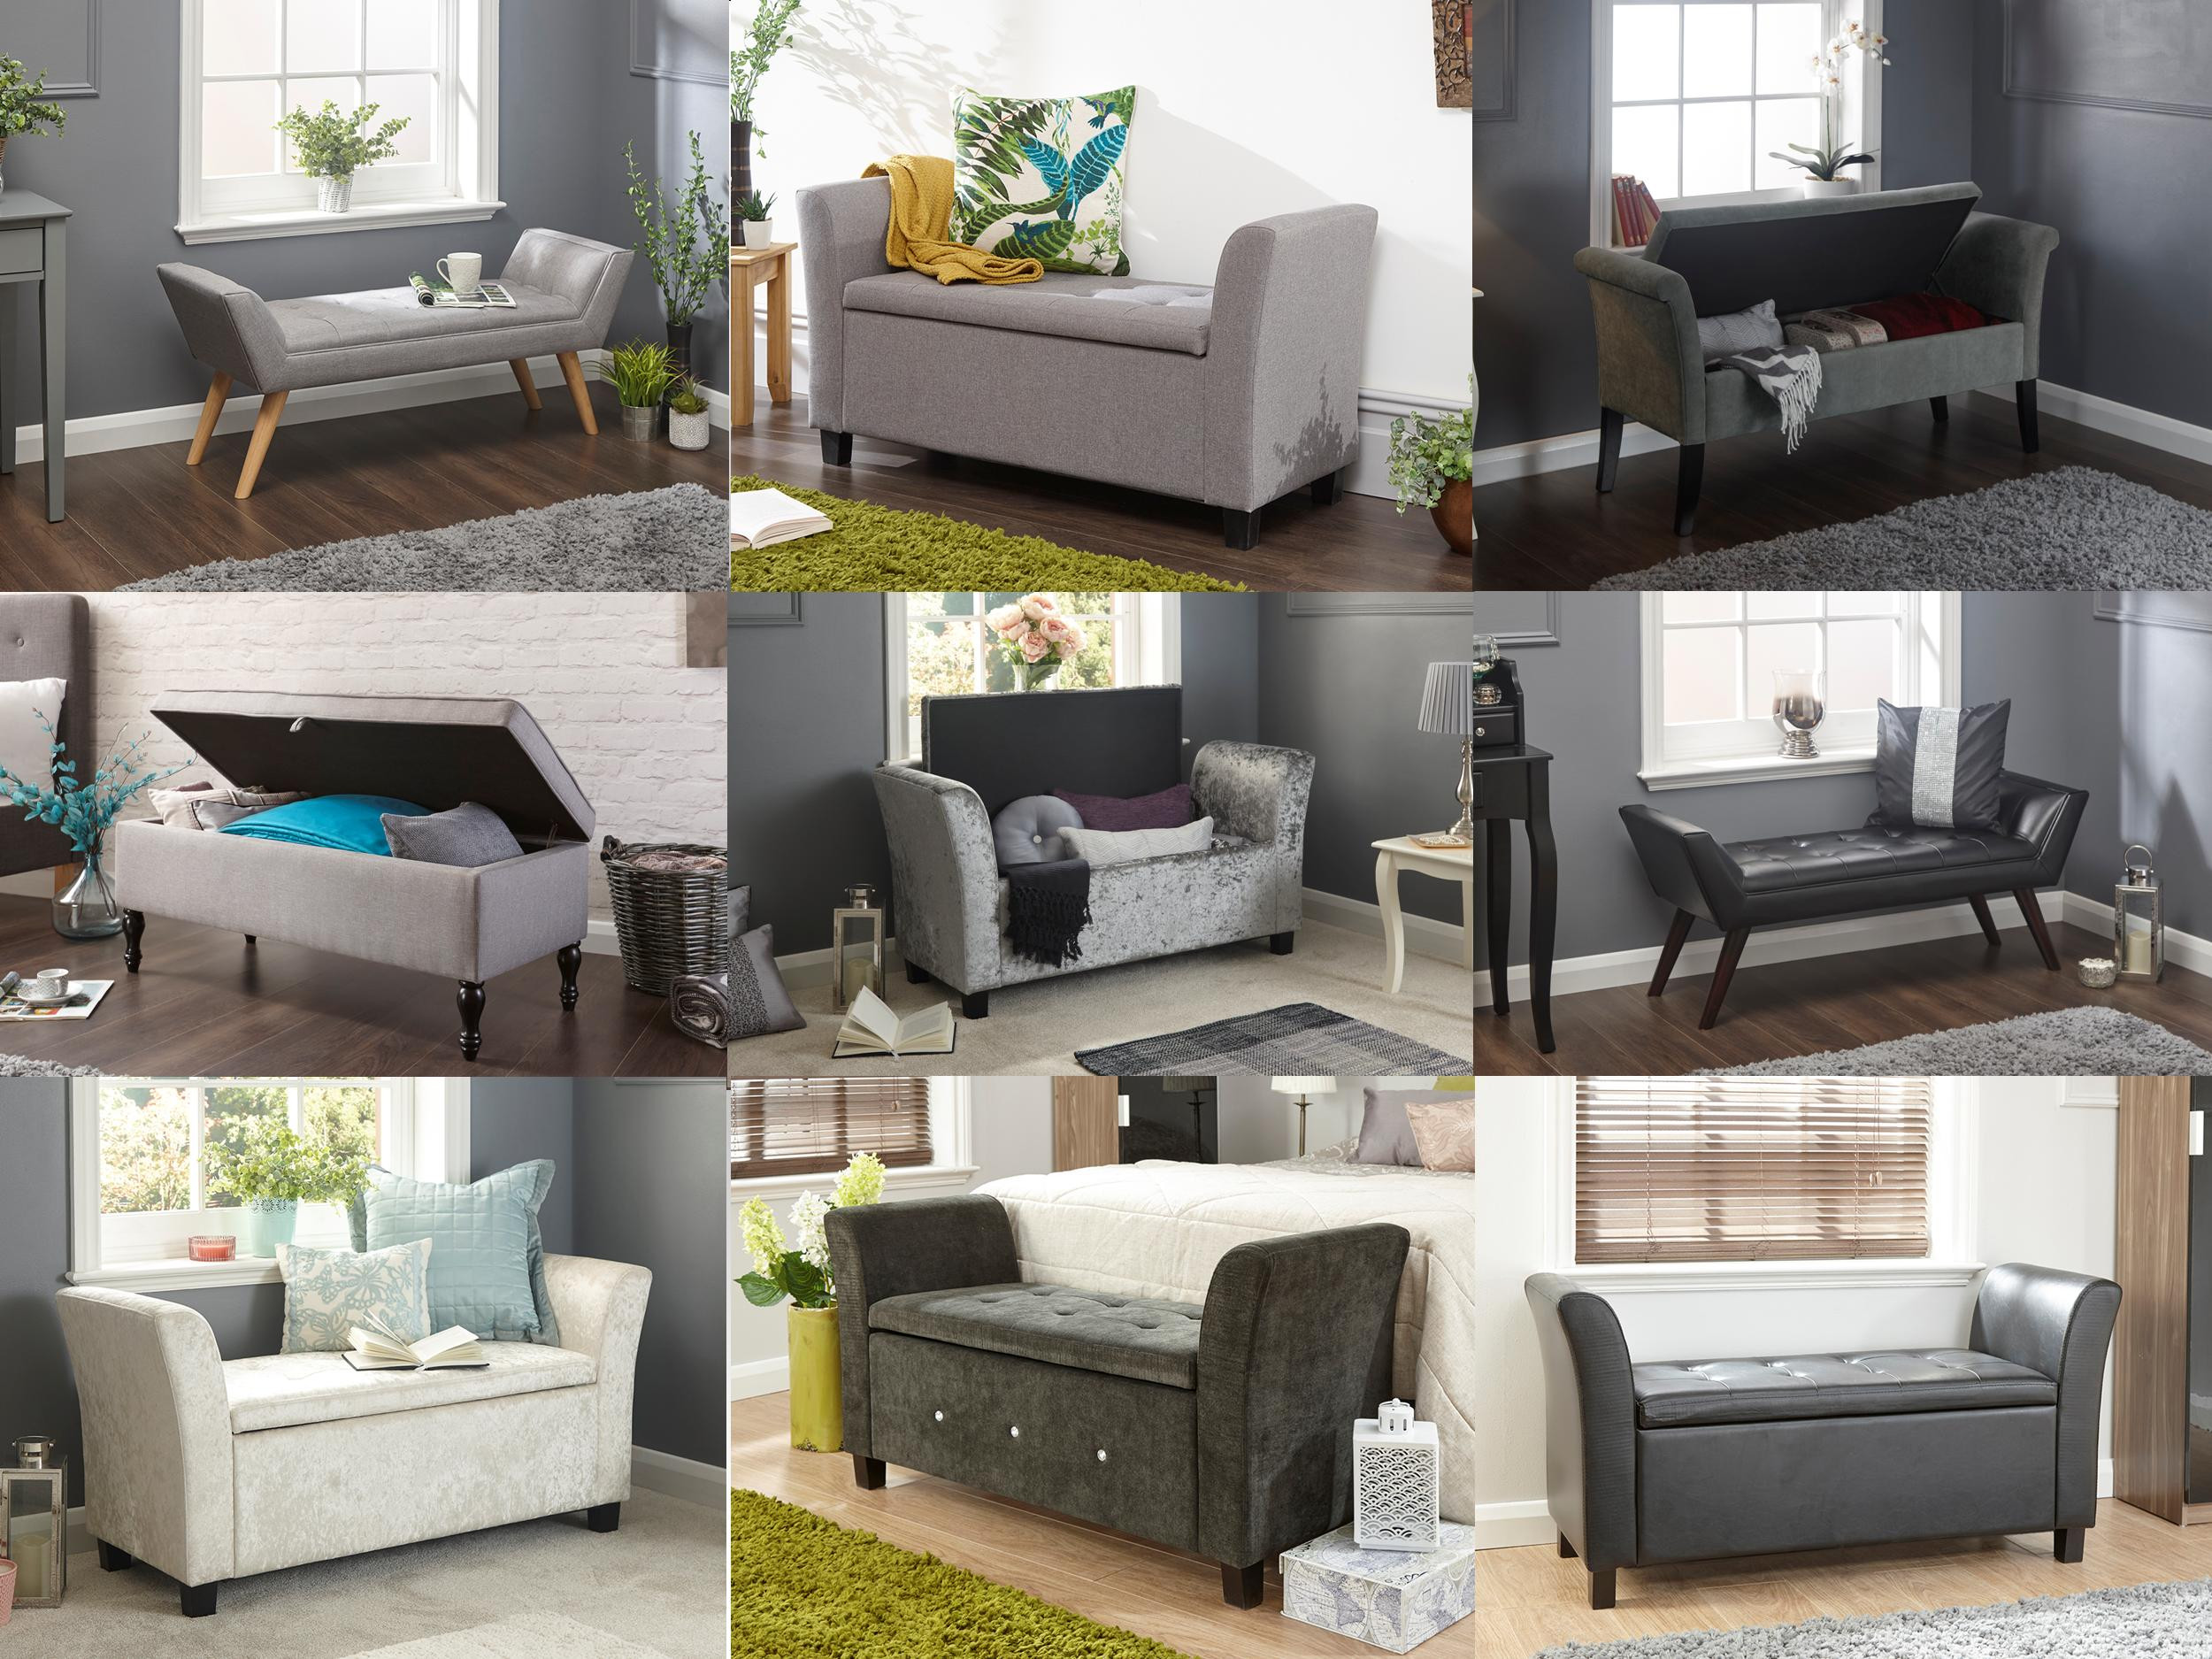 Bedroom Storage Bench Seat
 Window Seat Benches with Storage Bedroom Ottoman Bench